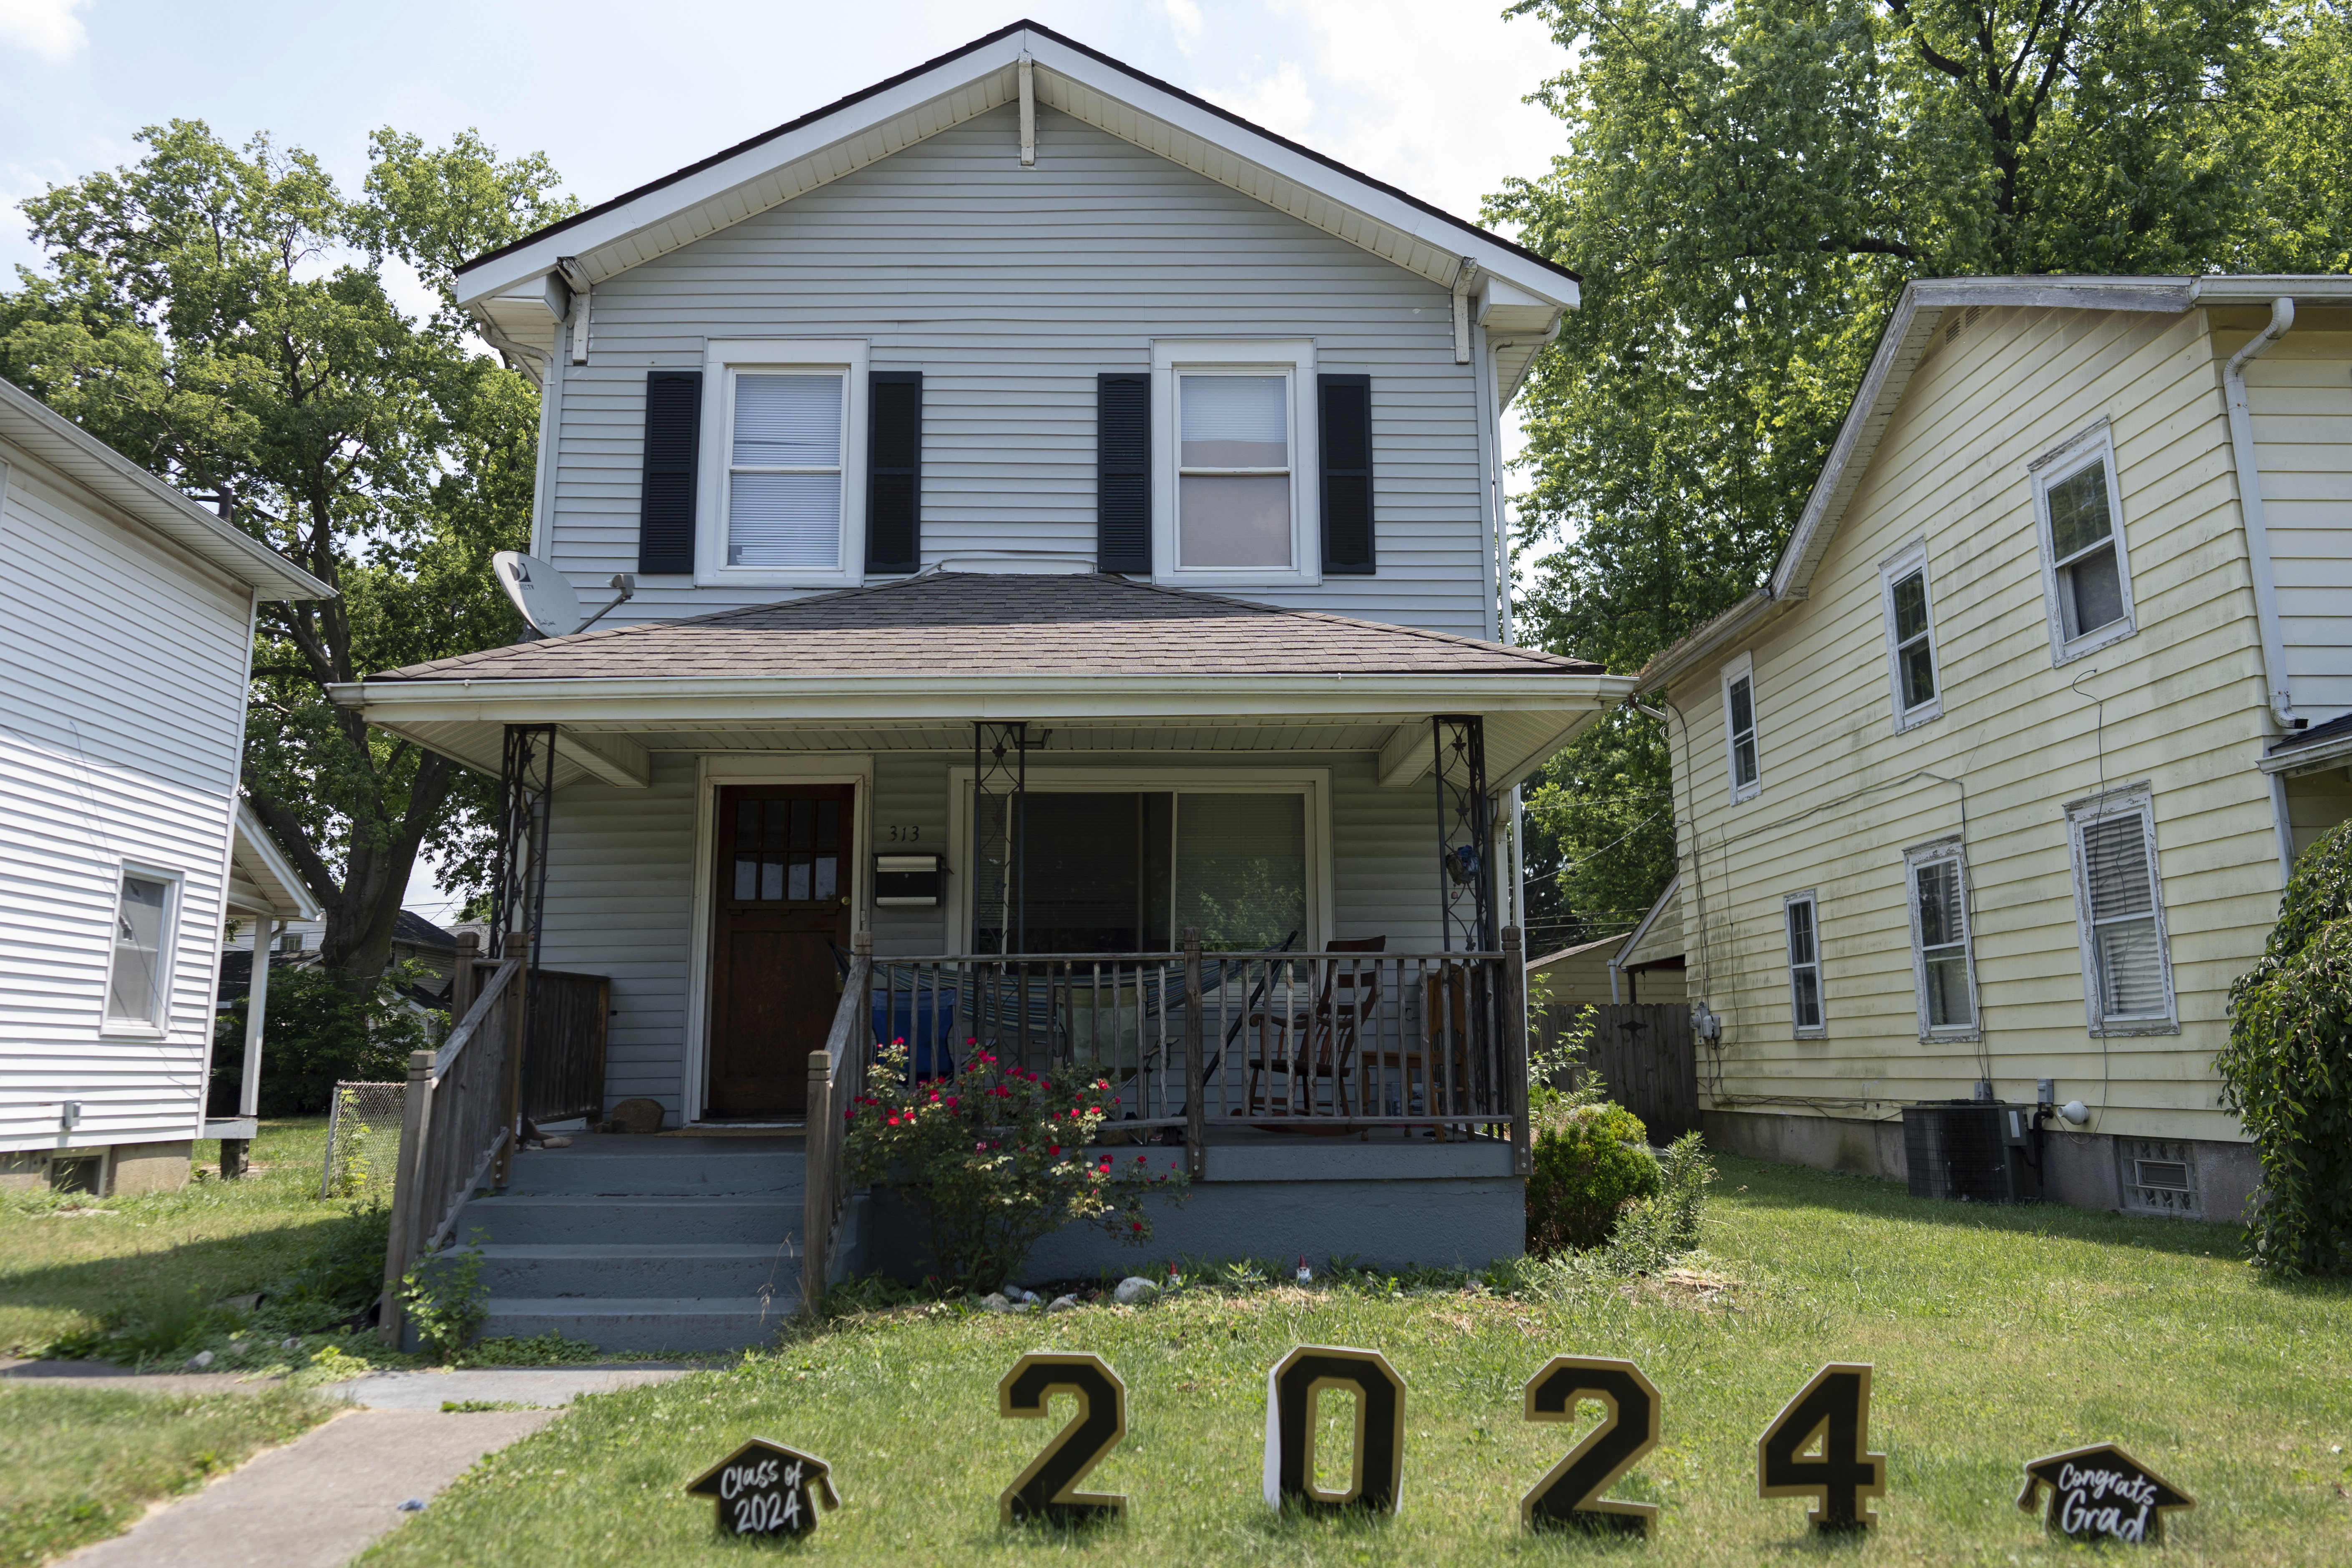 The house where Amanda Bailey and her family live is seen on Friday, June 21, 2024, in Middletown, Ohio. It is the house where "Hillbilly Elegy" author Sen. J.D. Vance, R-Ohio, grew up. Bailey said she thought “Hillbilly Elegy” nailed it, and that former President Donald Trump and Vance would “make a great team.” (AP Photo/Carolyn Kaster)